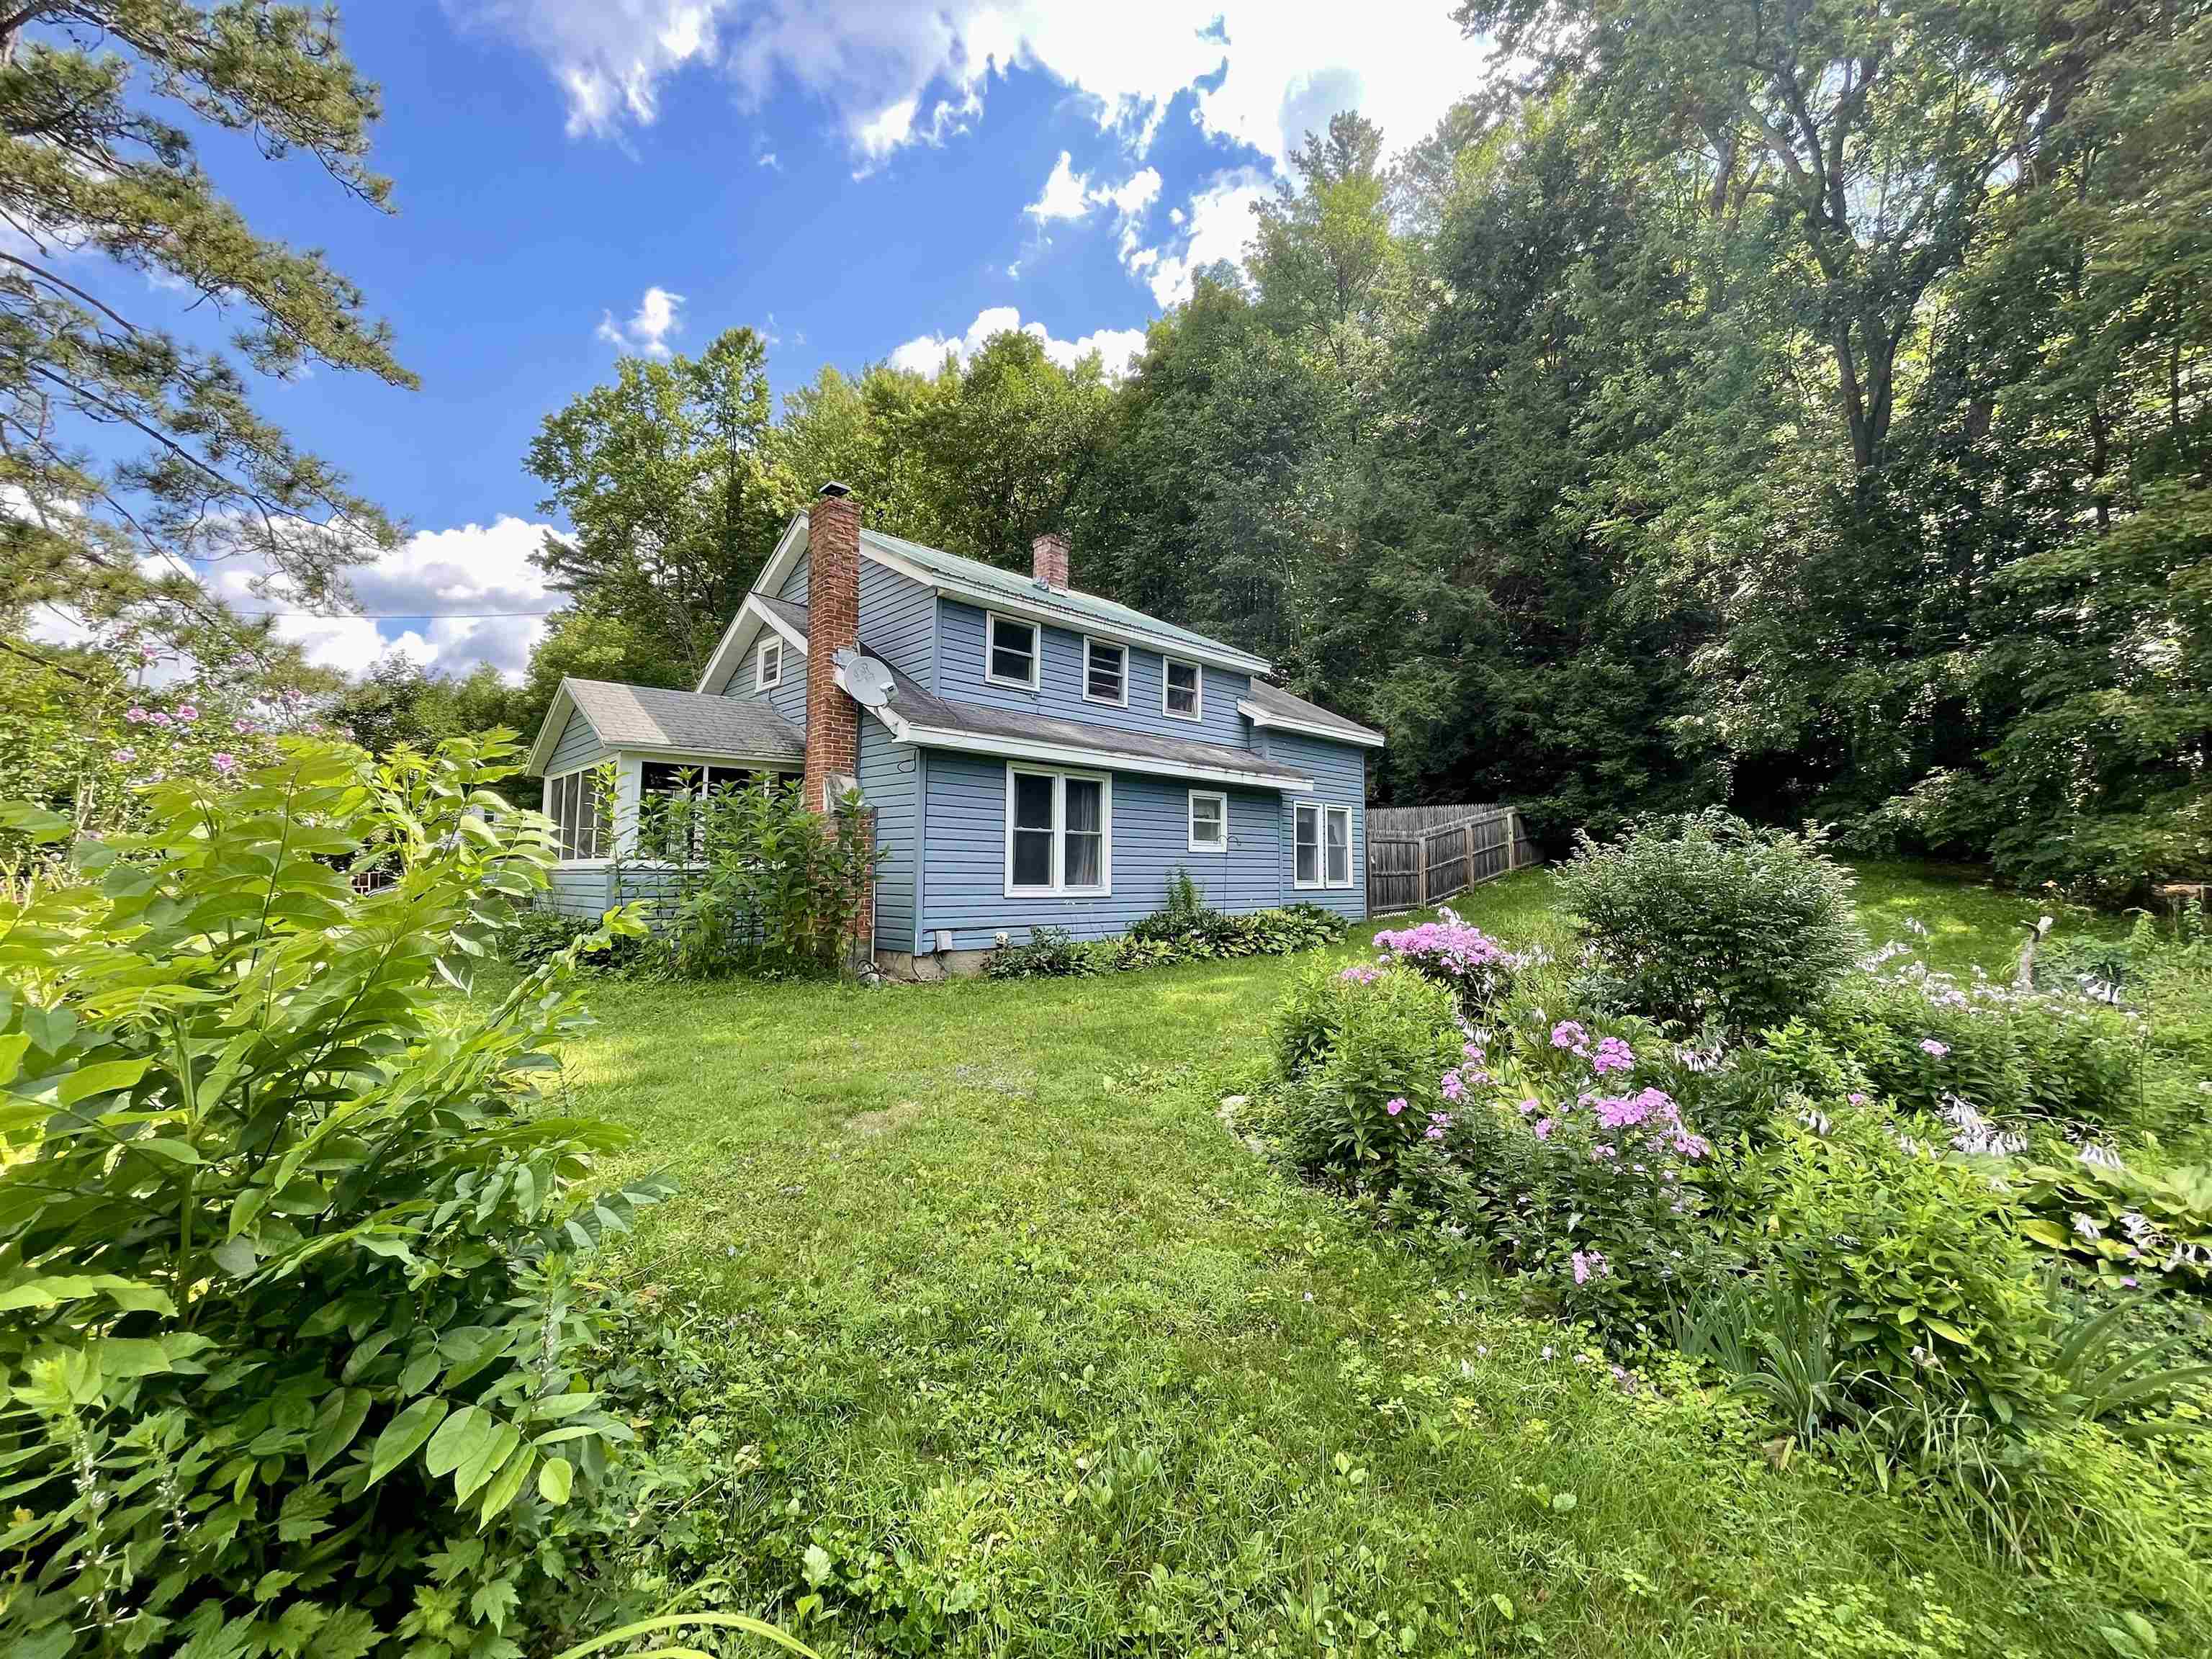 PITTSFORD VT Homes for sale